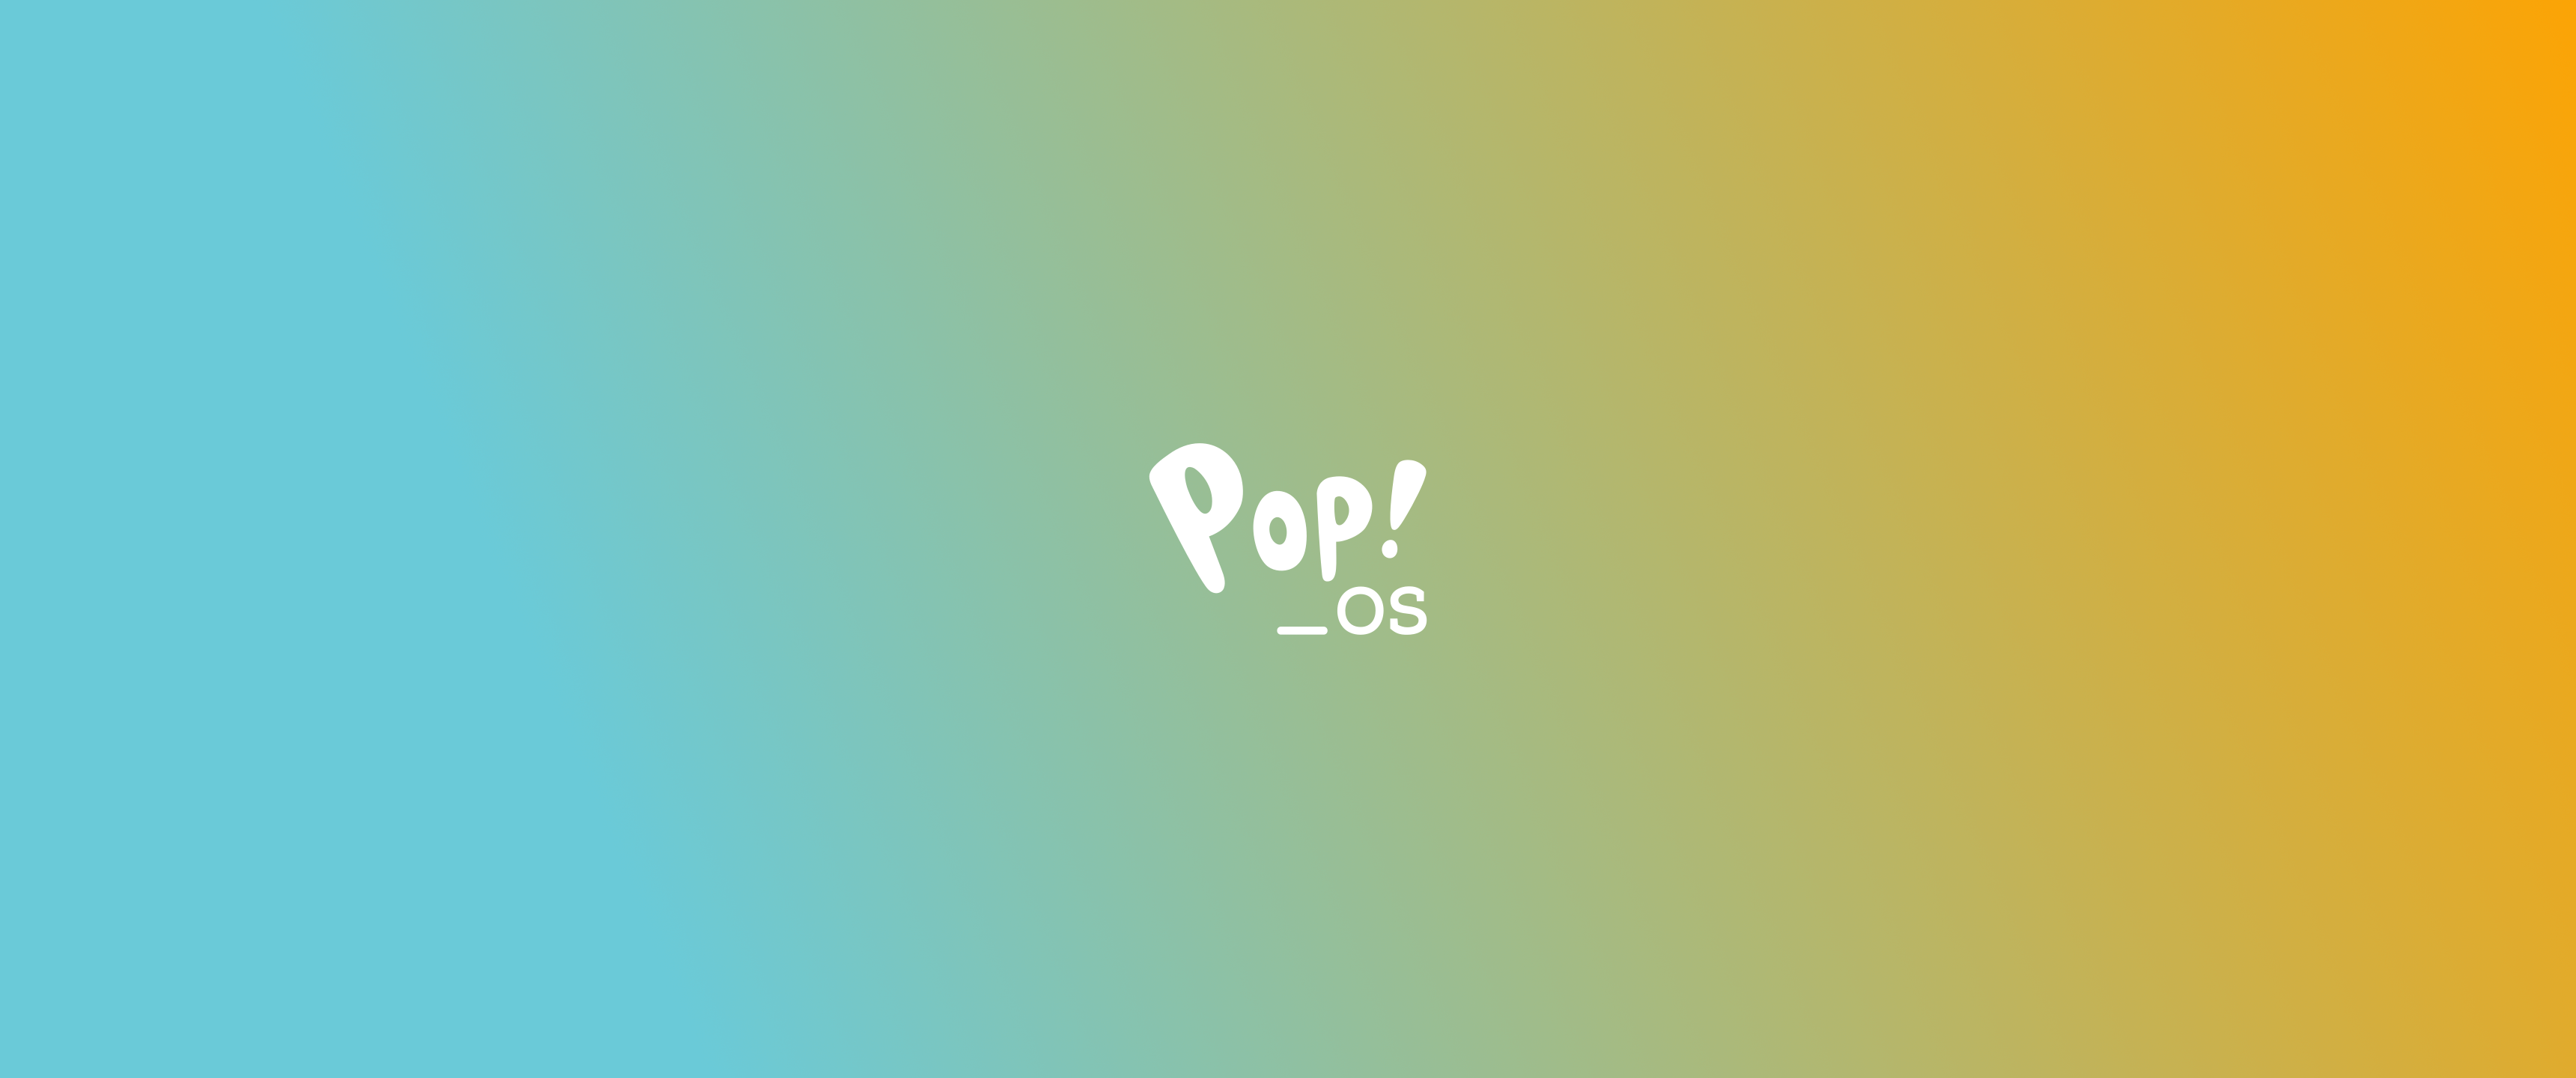 Gradient Minimalism Operating System Pop OS Linux Logo Simple Background 3440x1440